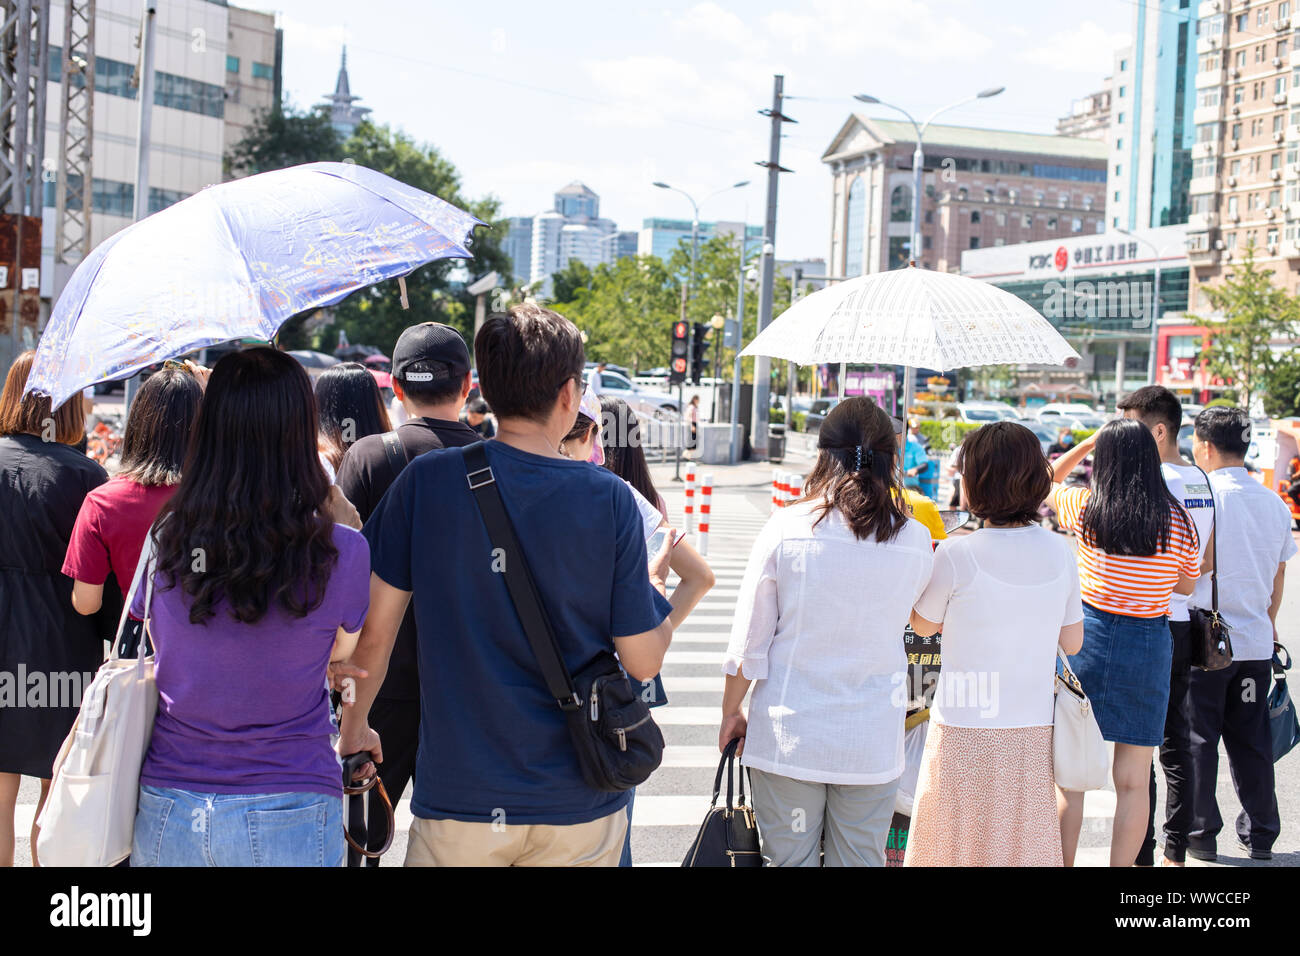 Beijing, China - August 17, 2019. A crowd of Chinese people are waiting for a green light. Chinese women hiding from the sun under umbrella. Stock Photo